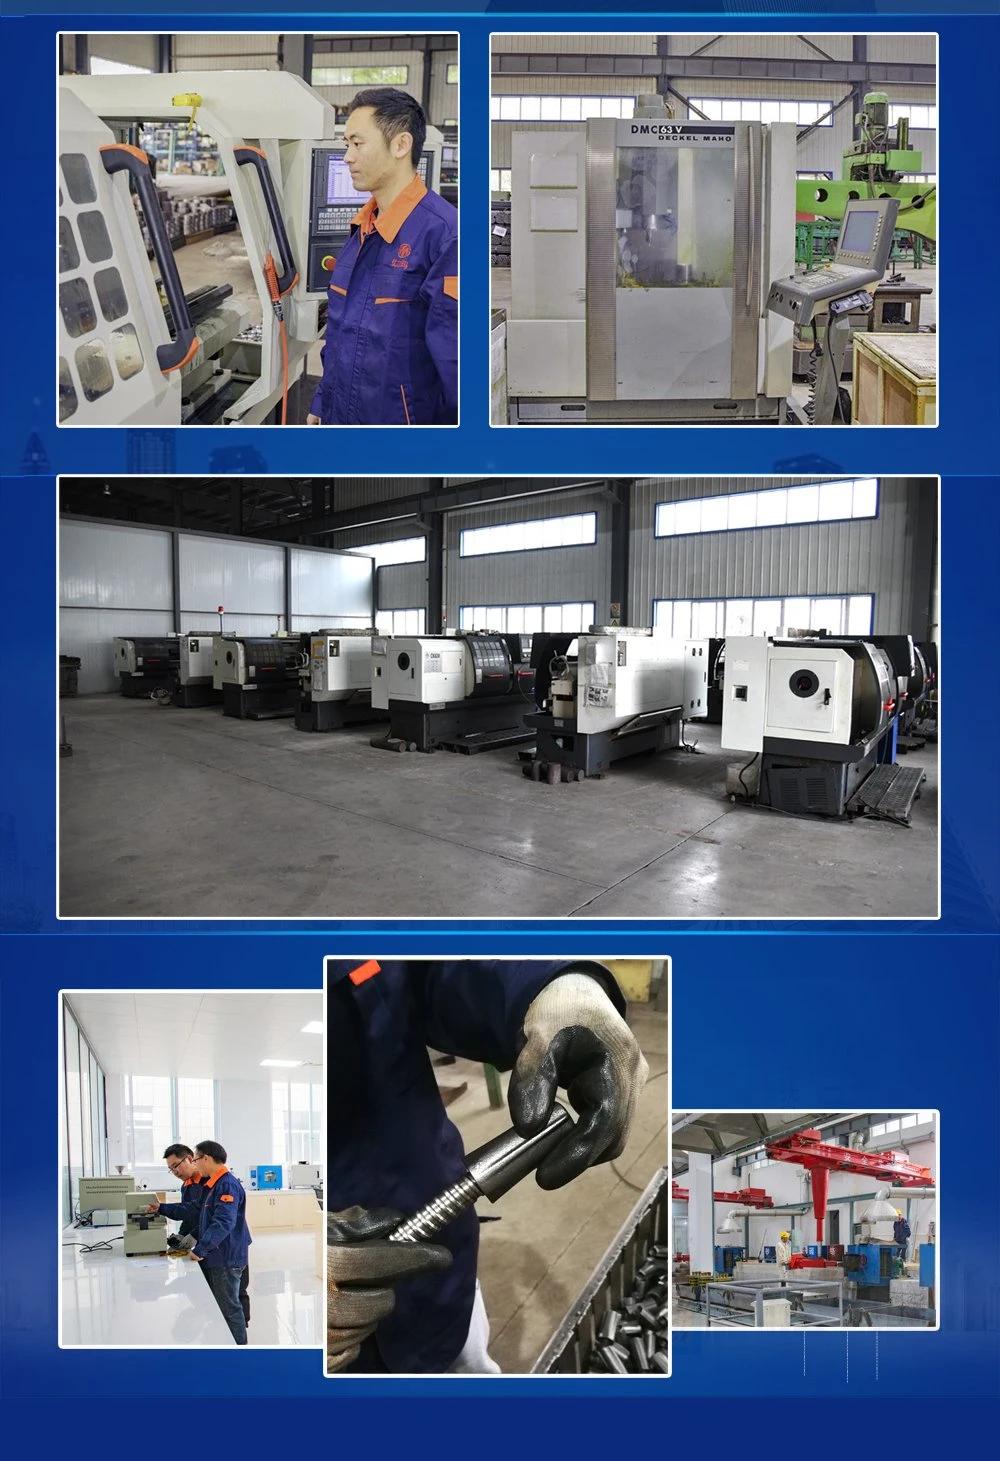 Machining,Equipment,Accessories,Decoration,Mating Facility,Decoration,Lighting,Basement,Warehouse,Electricity,Lamp,Railway,Truck,Subway,Bus,Auto Part,Power Fit